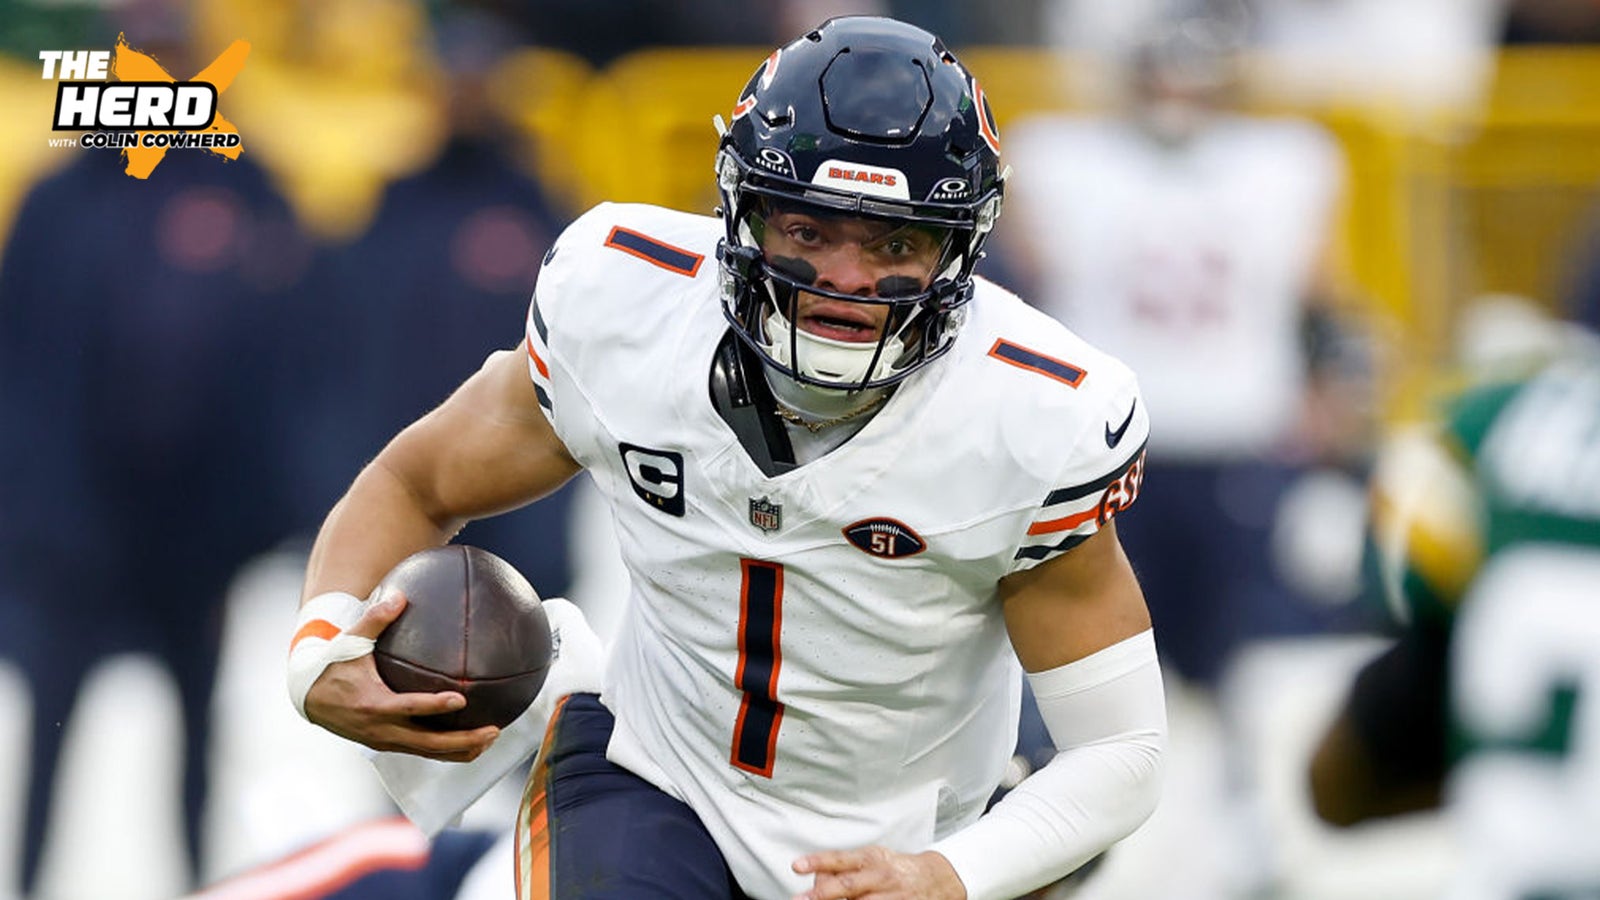 Bears QB room with Justin Fields was reportedly 'toxic'